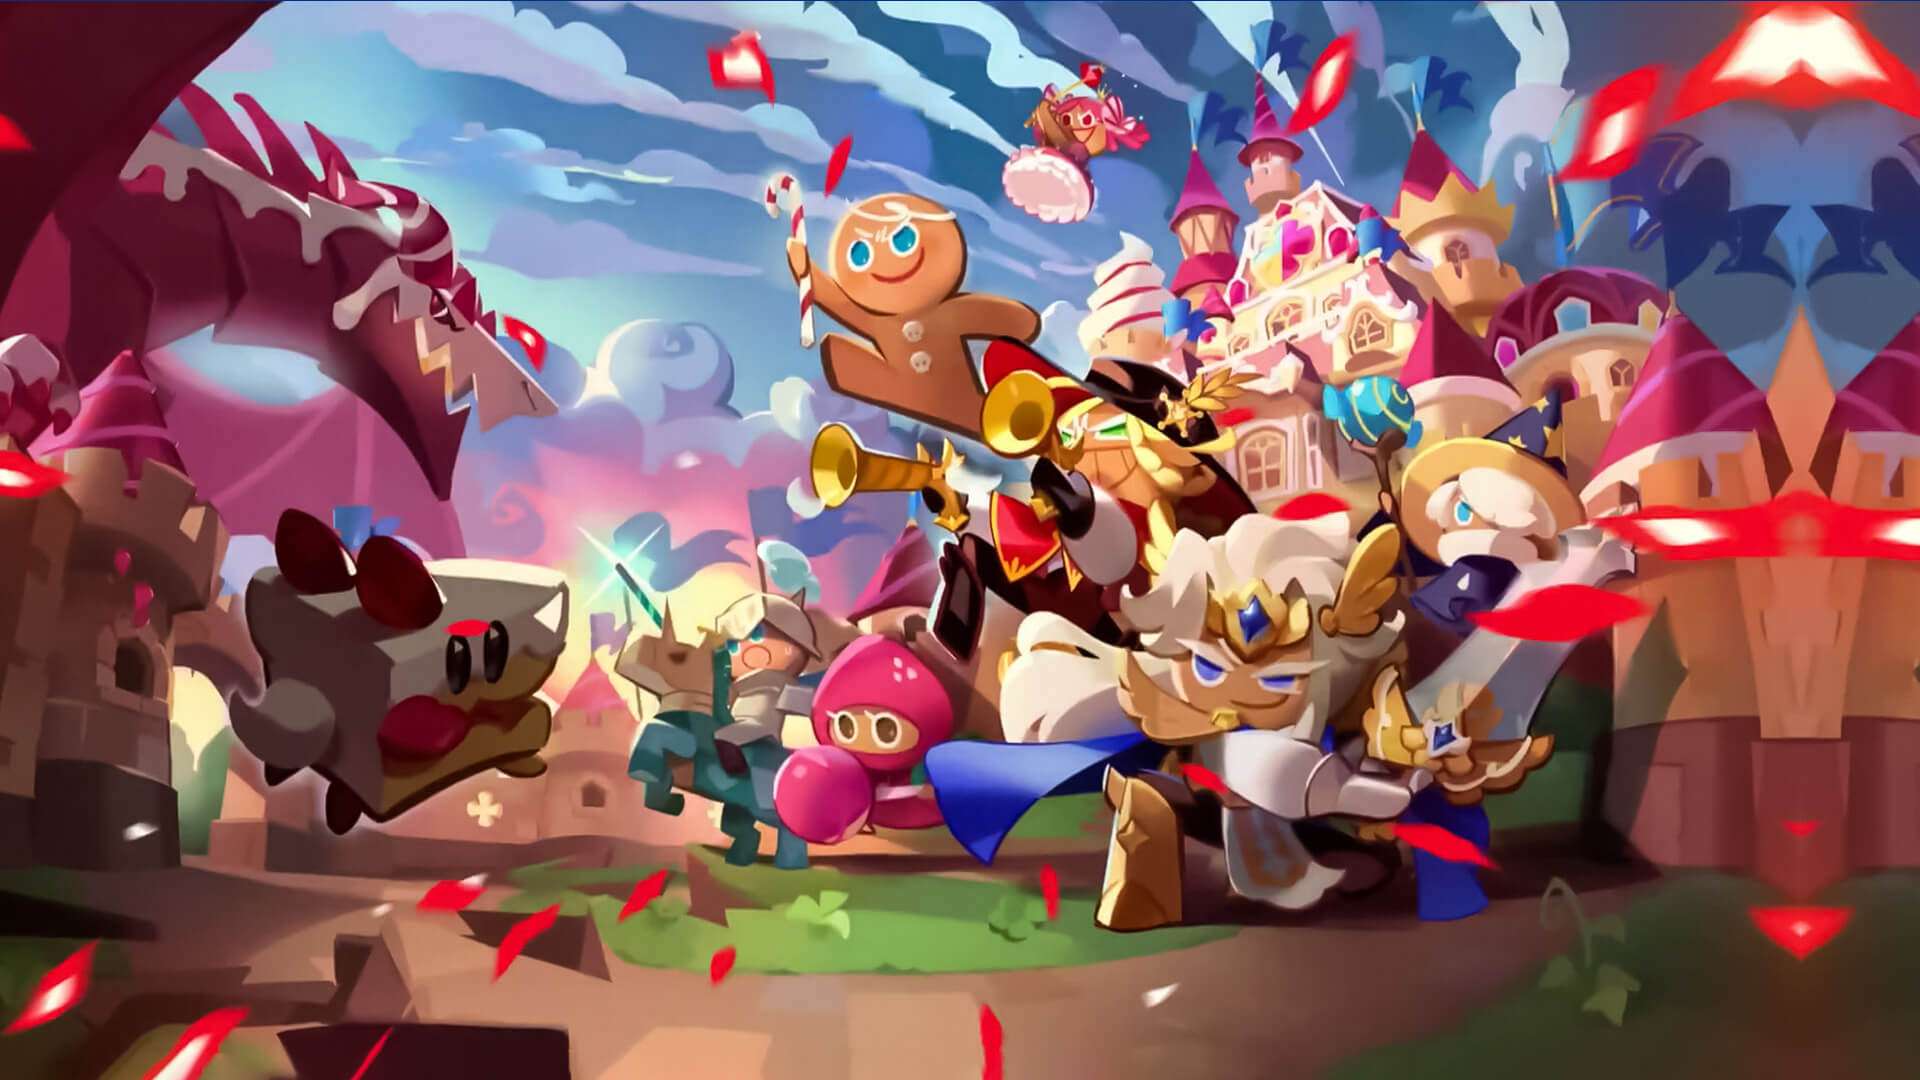 Build Your Kingdom of Sweets in Cookie Run: Kingdom on  InstaPlay